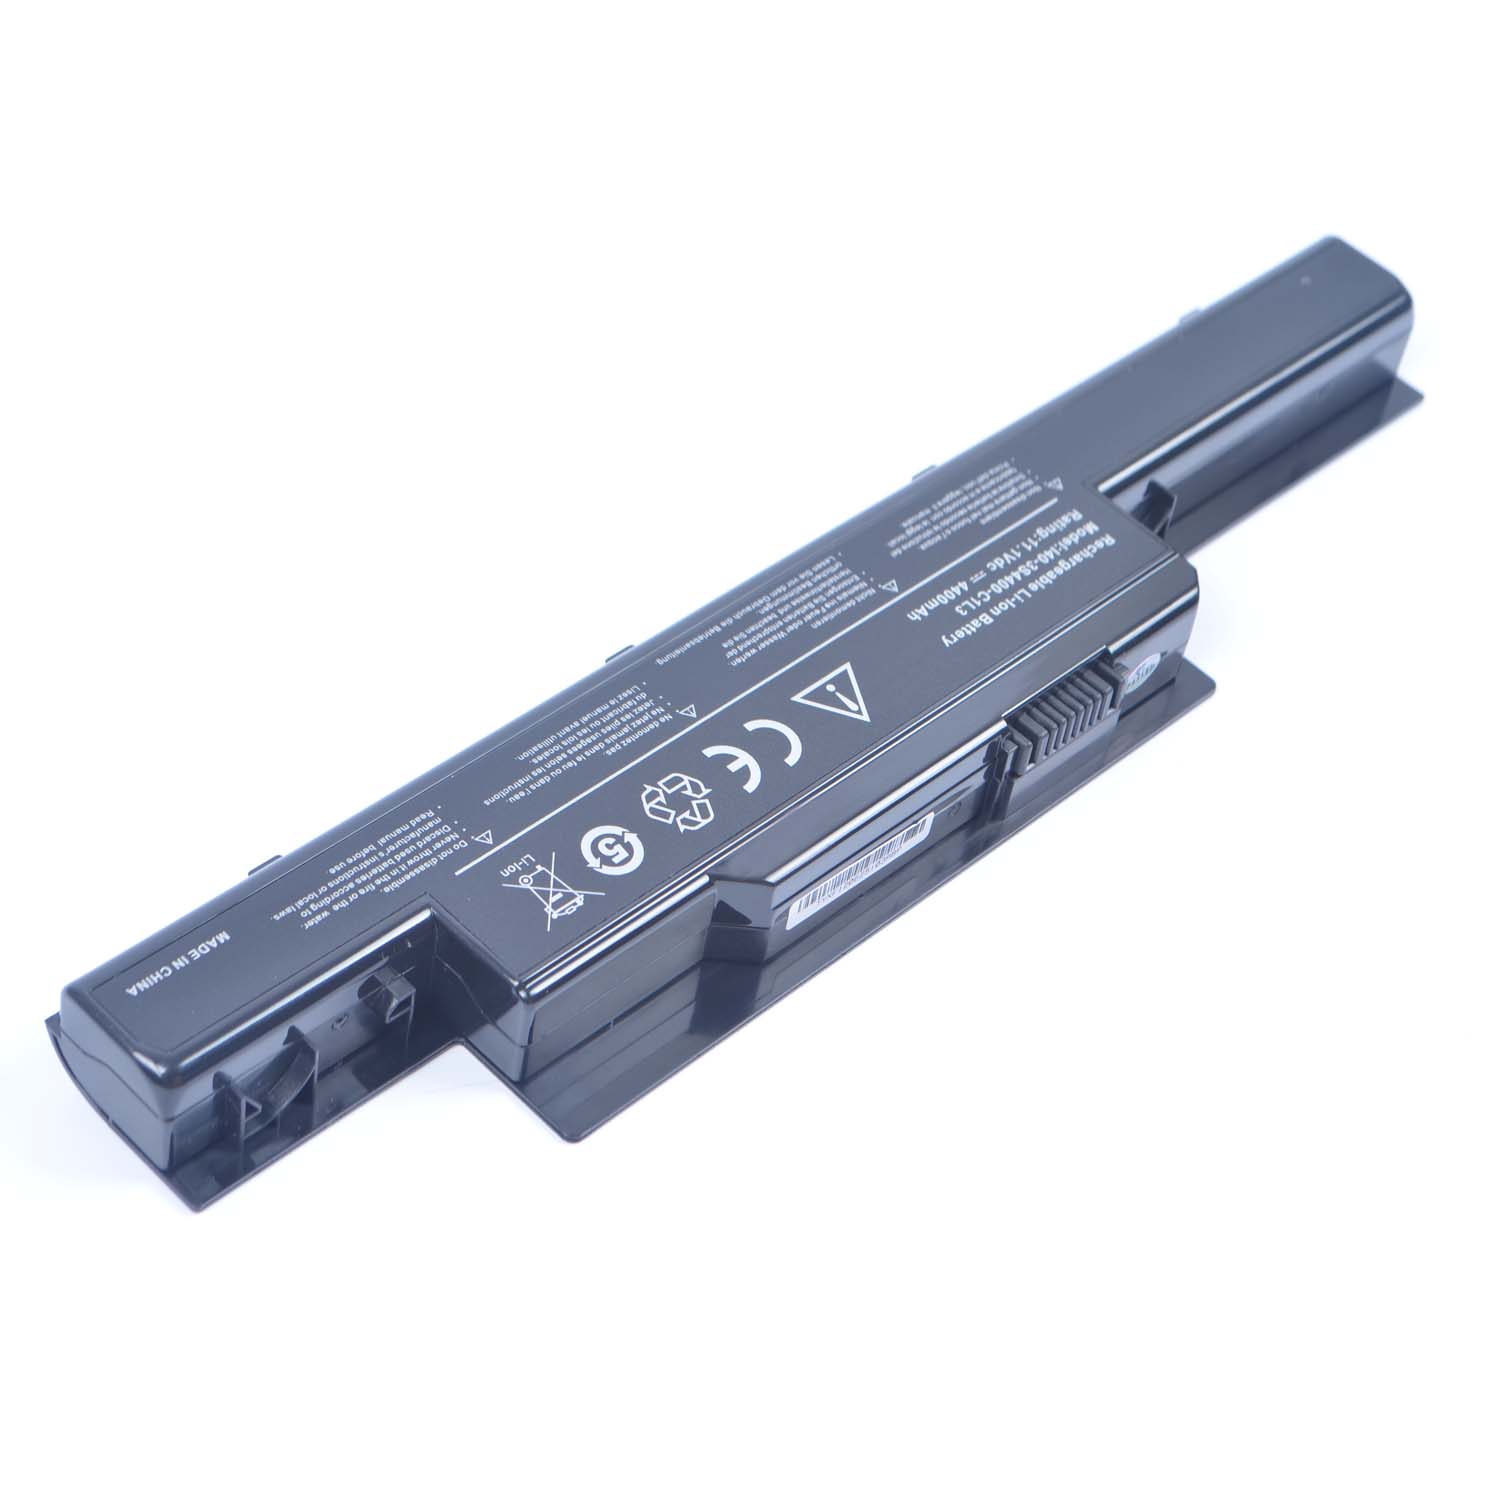 Replacement Battery for ADVENT I40-4S2600-G1L3 battery